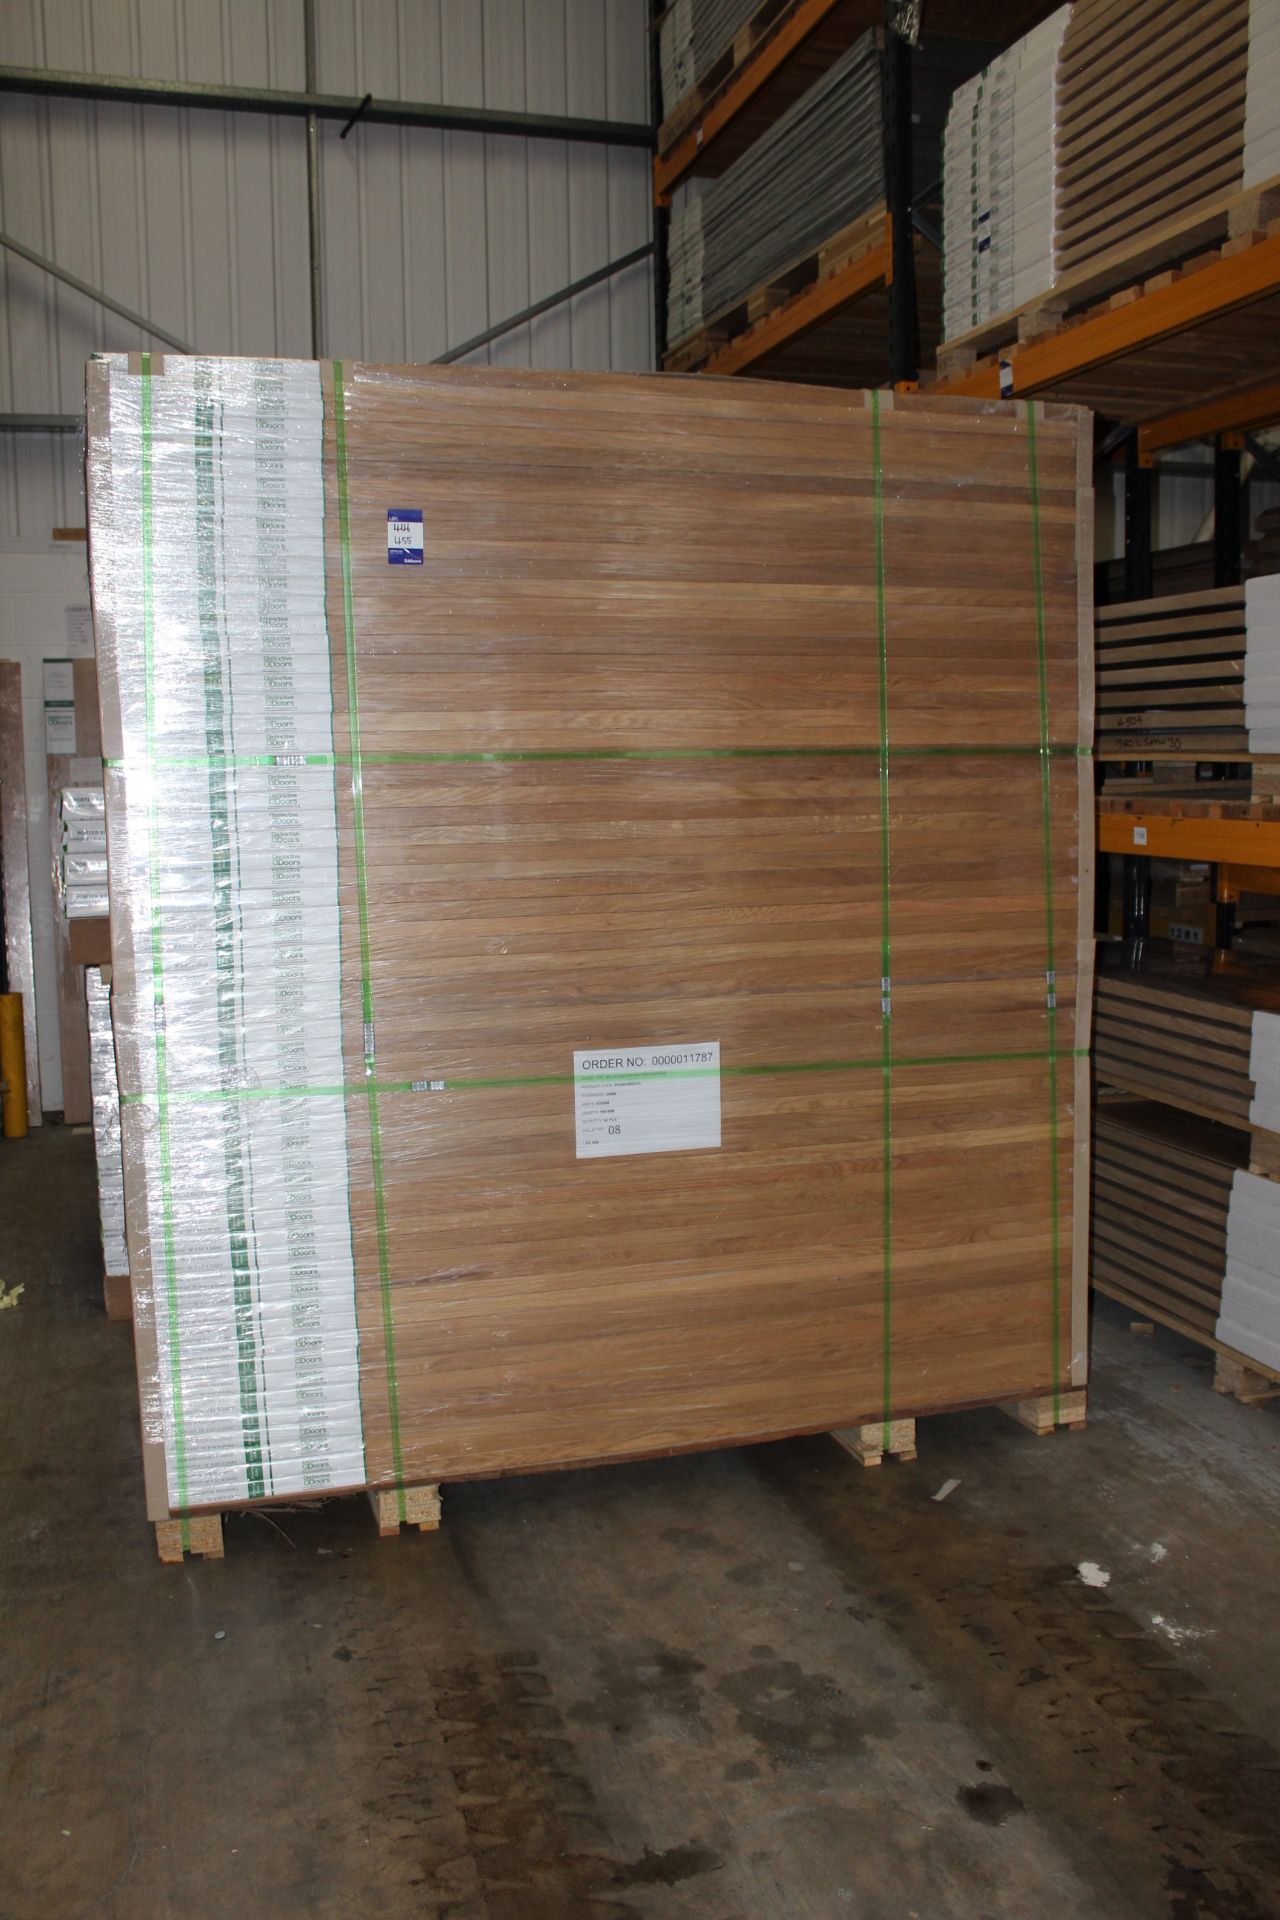 6 x Mexicano White Oak P/F Int 78”x33”x35mm - Lots to be handed out in order they are stacked, at